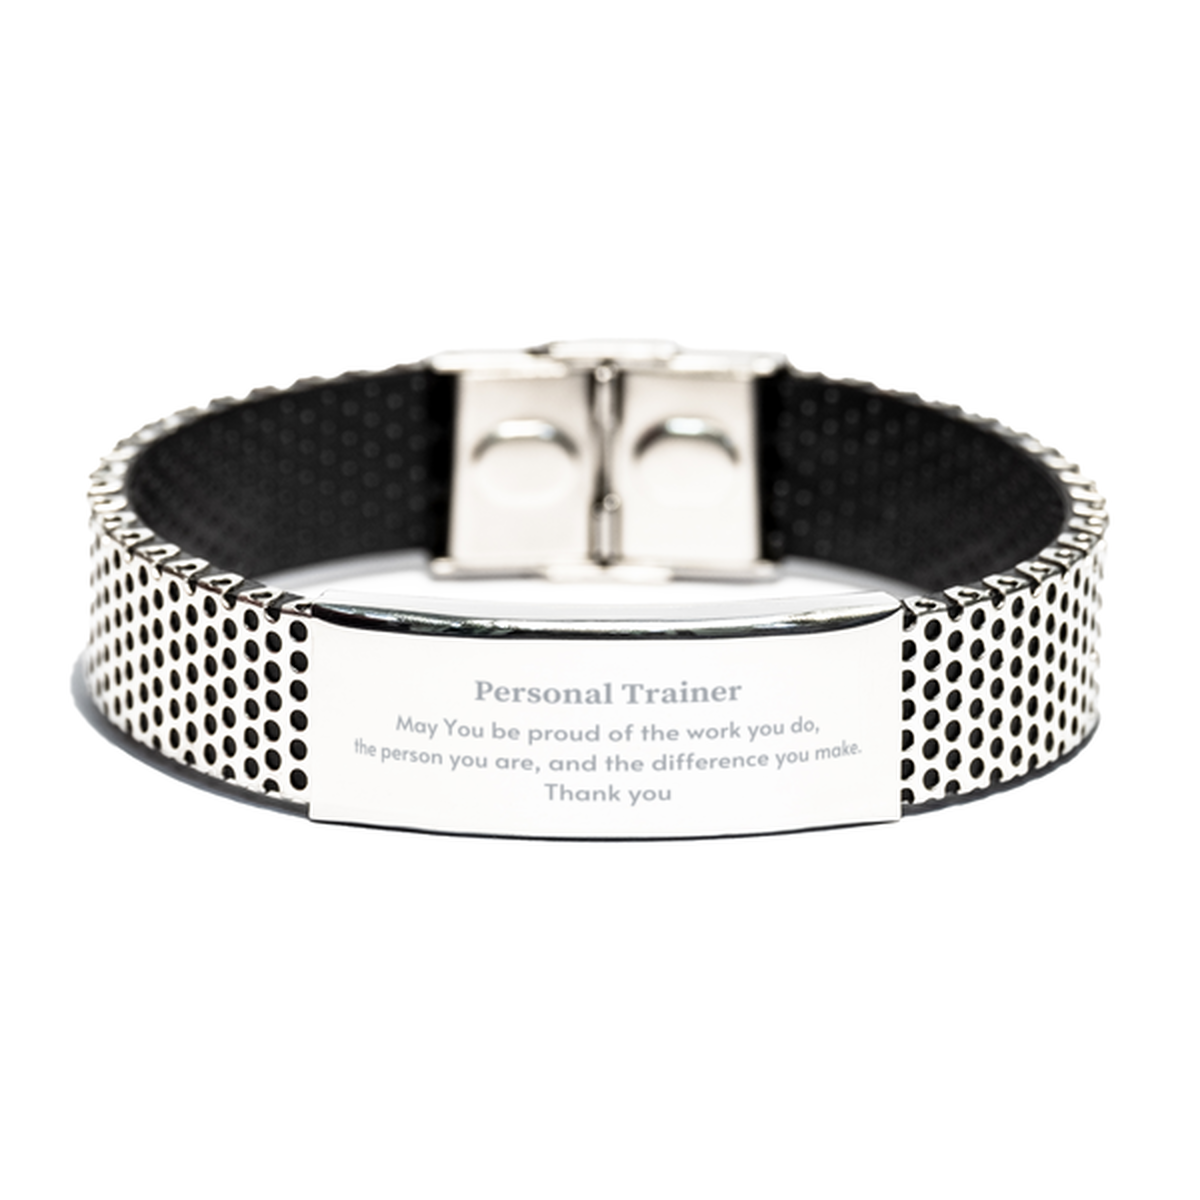 Heartwarming Stainless Steel Bracelet Retirement Coworkers Gifts for Personal Trainer, Personal Trainer May You be proud of the work you do, the person you are Gifts for Boss Men Women Friends